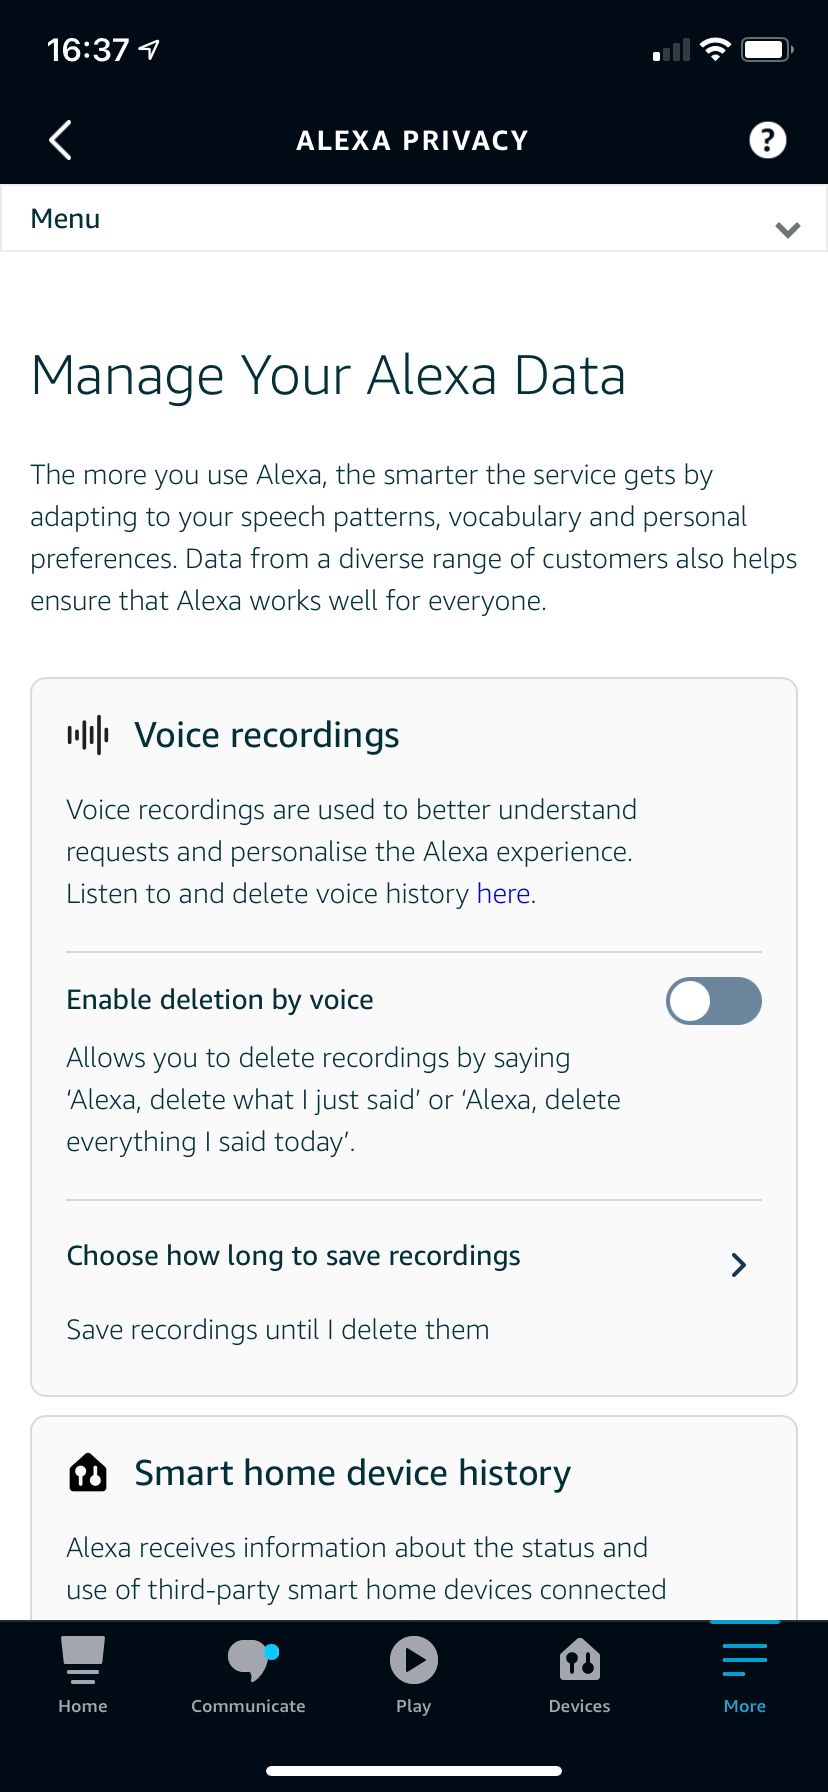 Alexa settings page for managing voice recordings